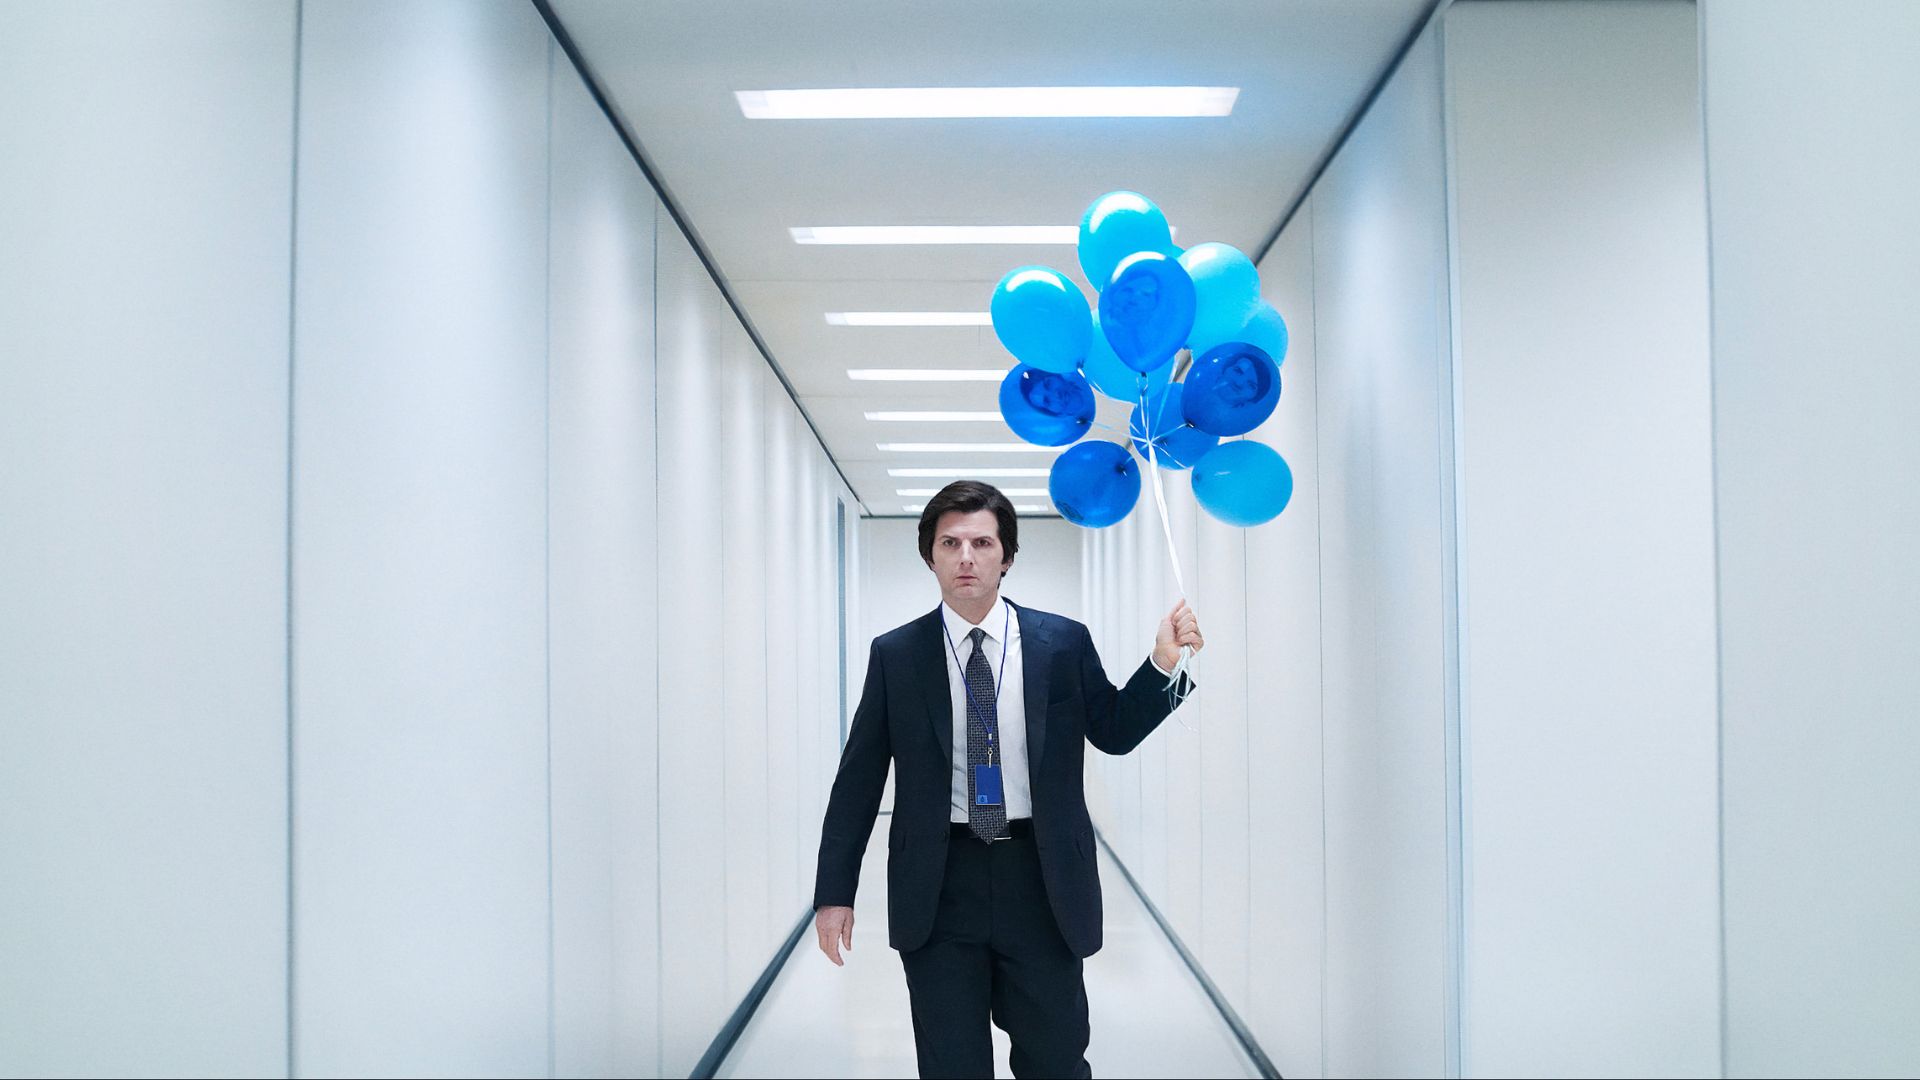 Mark Scout (Adam Scott) walks down an all-white hallway wearing a suit and carrying blue balloons.